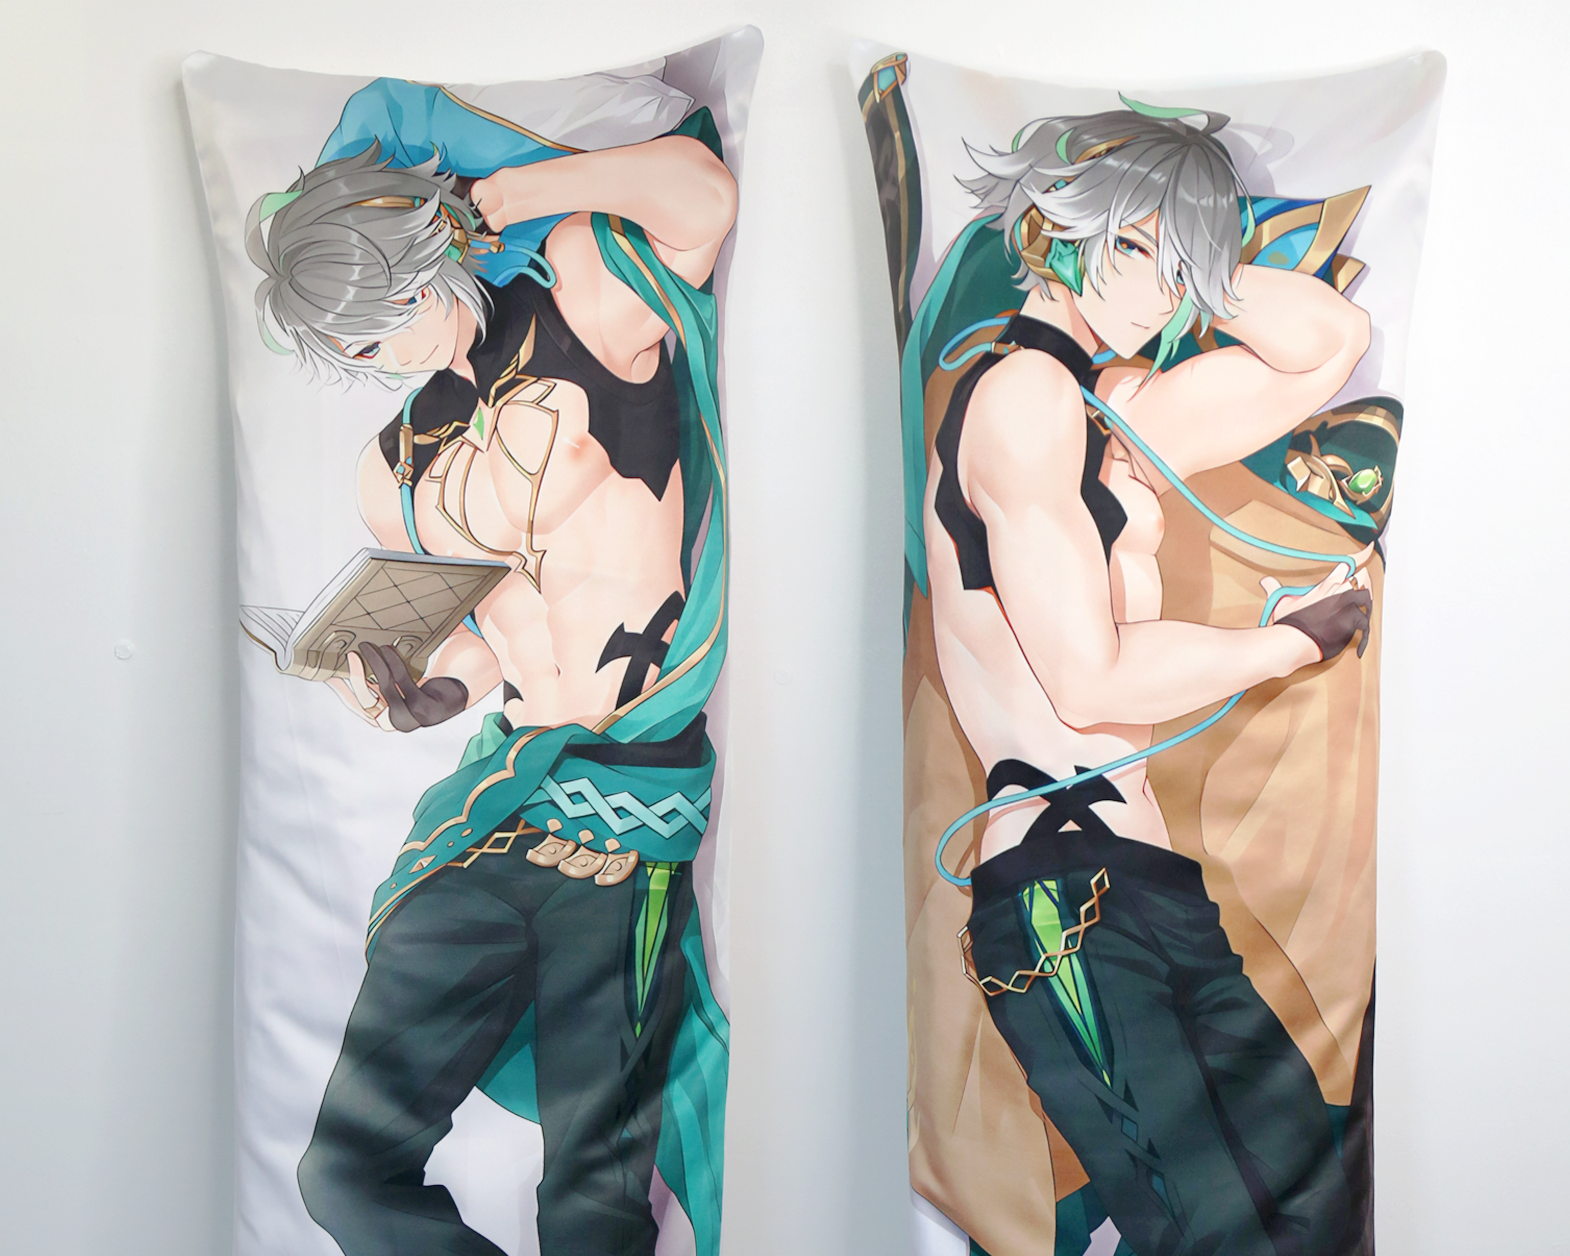 merchandise - Who was the first anime character to be on a body pillow? -  Anime & Manga Stack Exchange